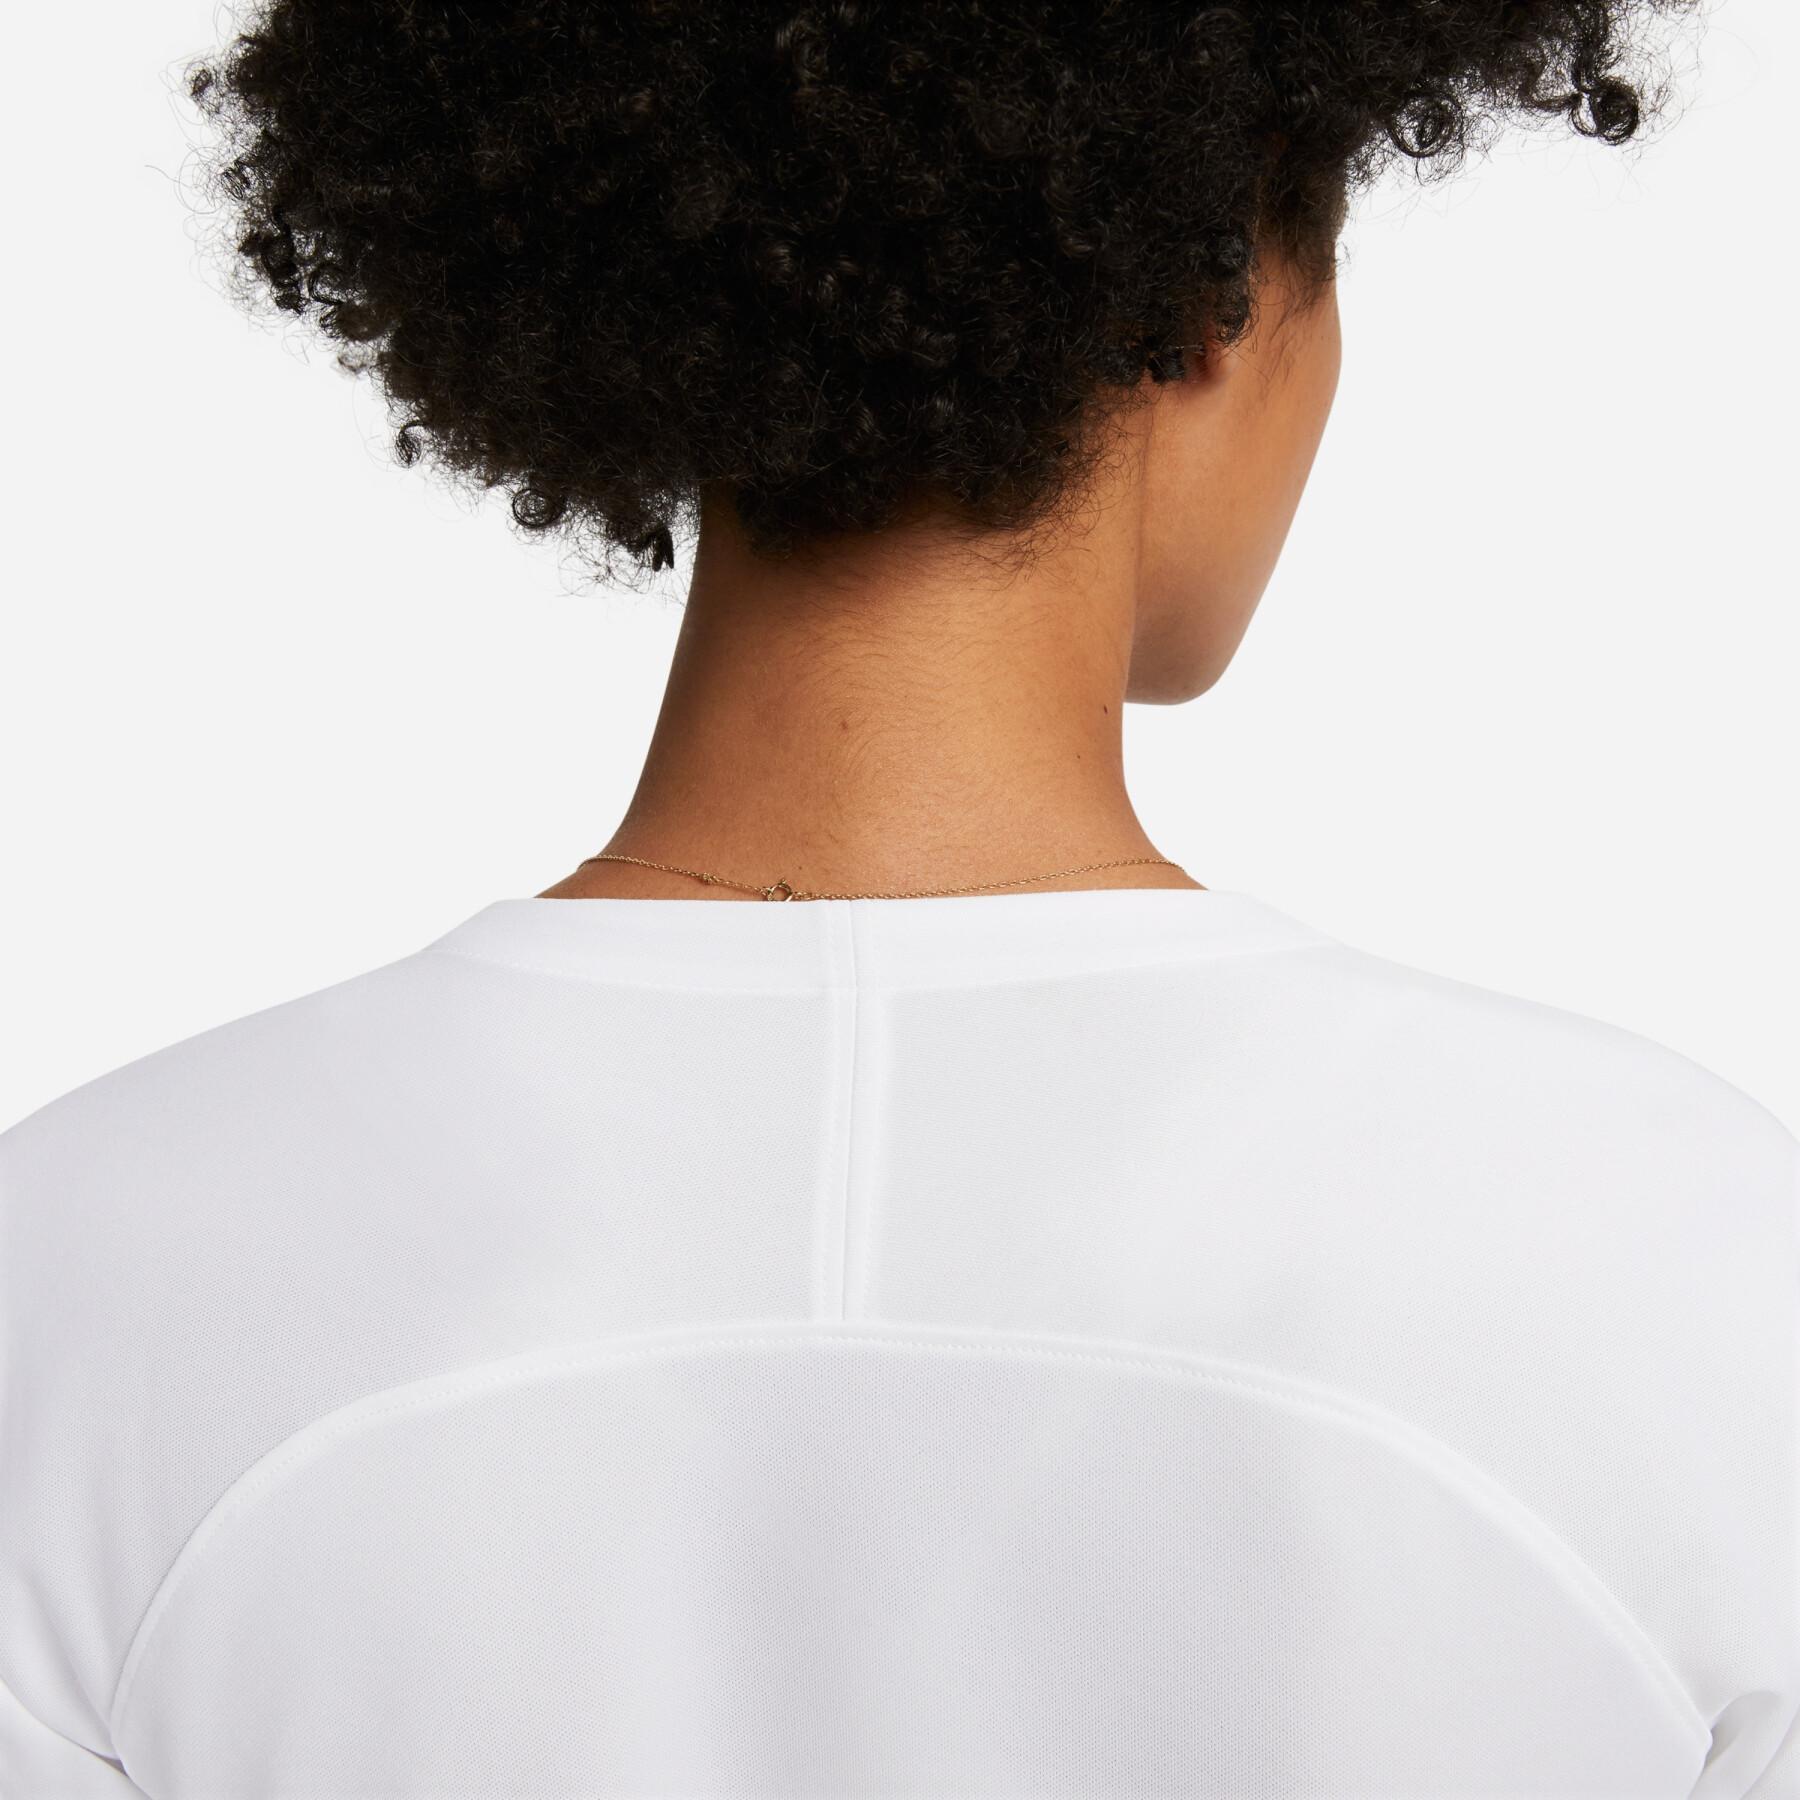 Women's jersey Nike Dri-FIT Park First Layer